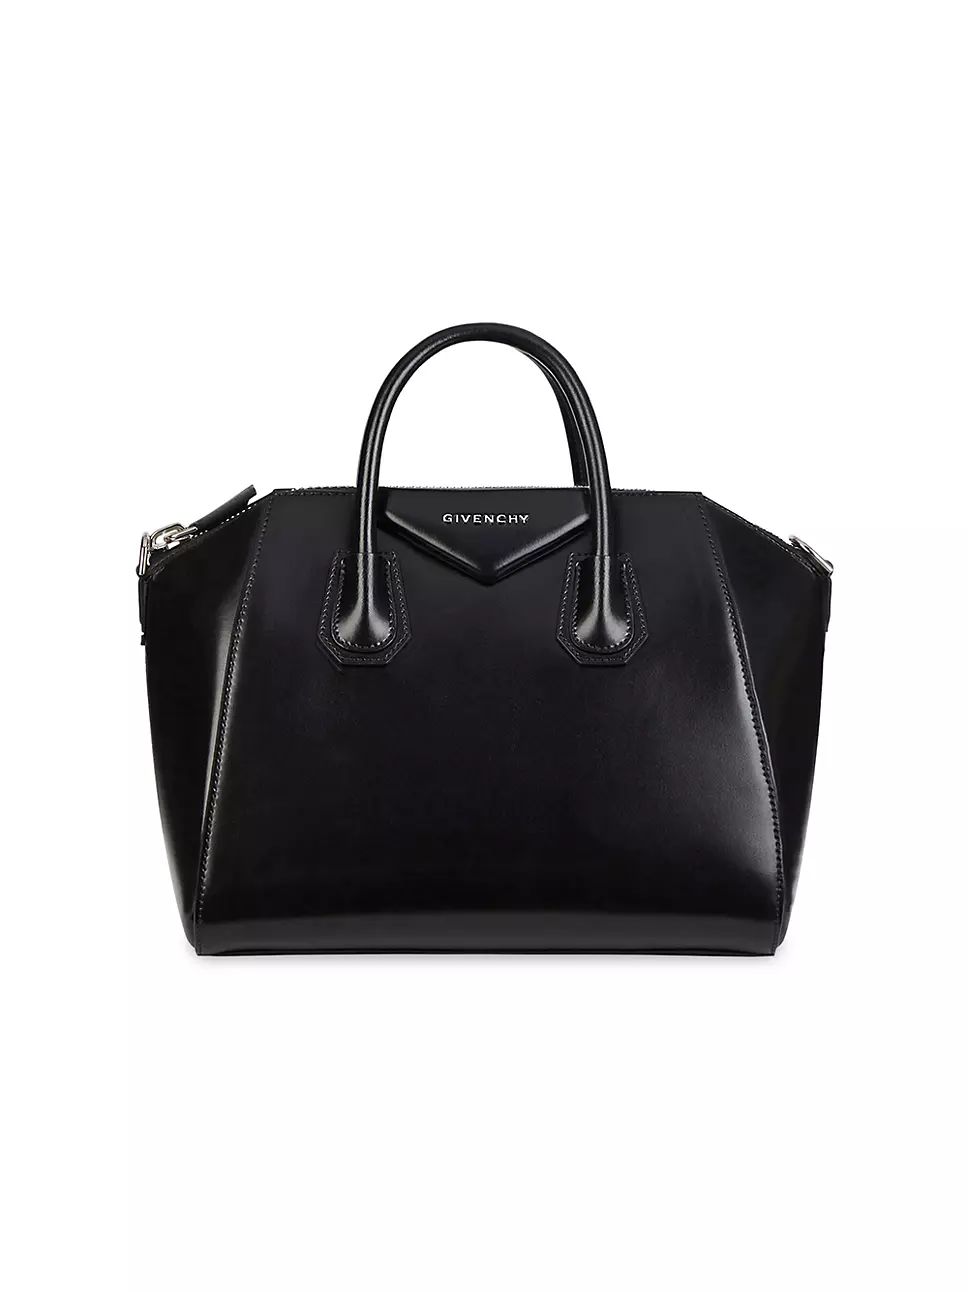 Givenchy | Saks Fifth Avenue